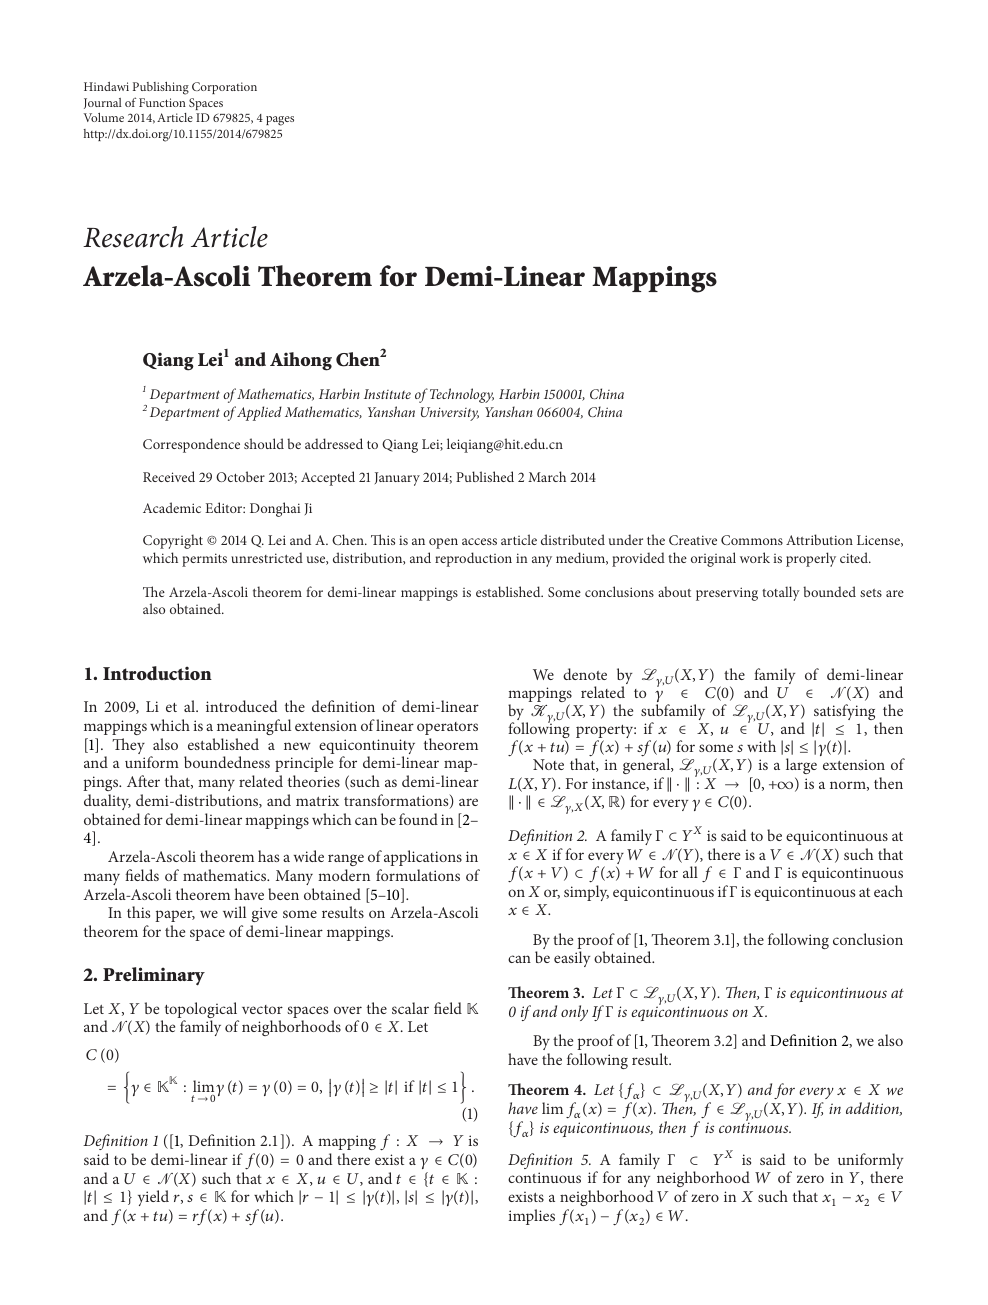 Arzela Ascoli Theorem For Demi Linear Mappings Topic Of Research Paper In Mathematics Download Scholarly Article Pdf And Read For Free On Cyberleninka Open Science Hub